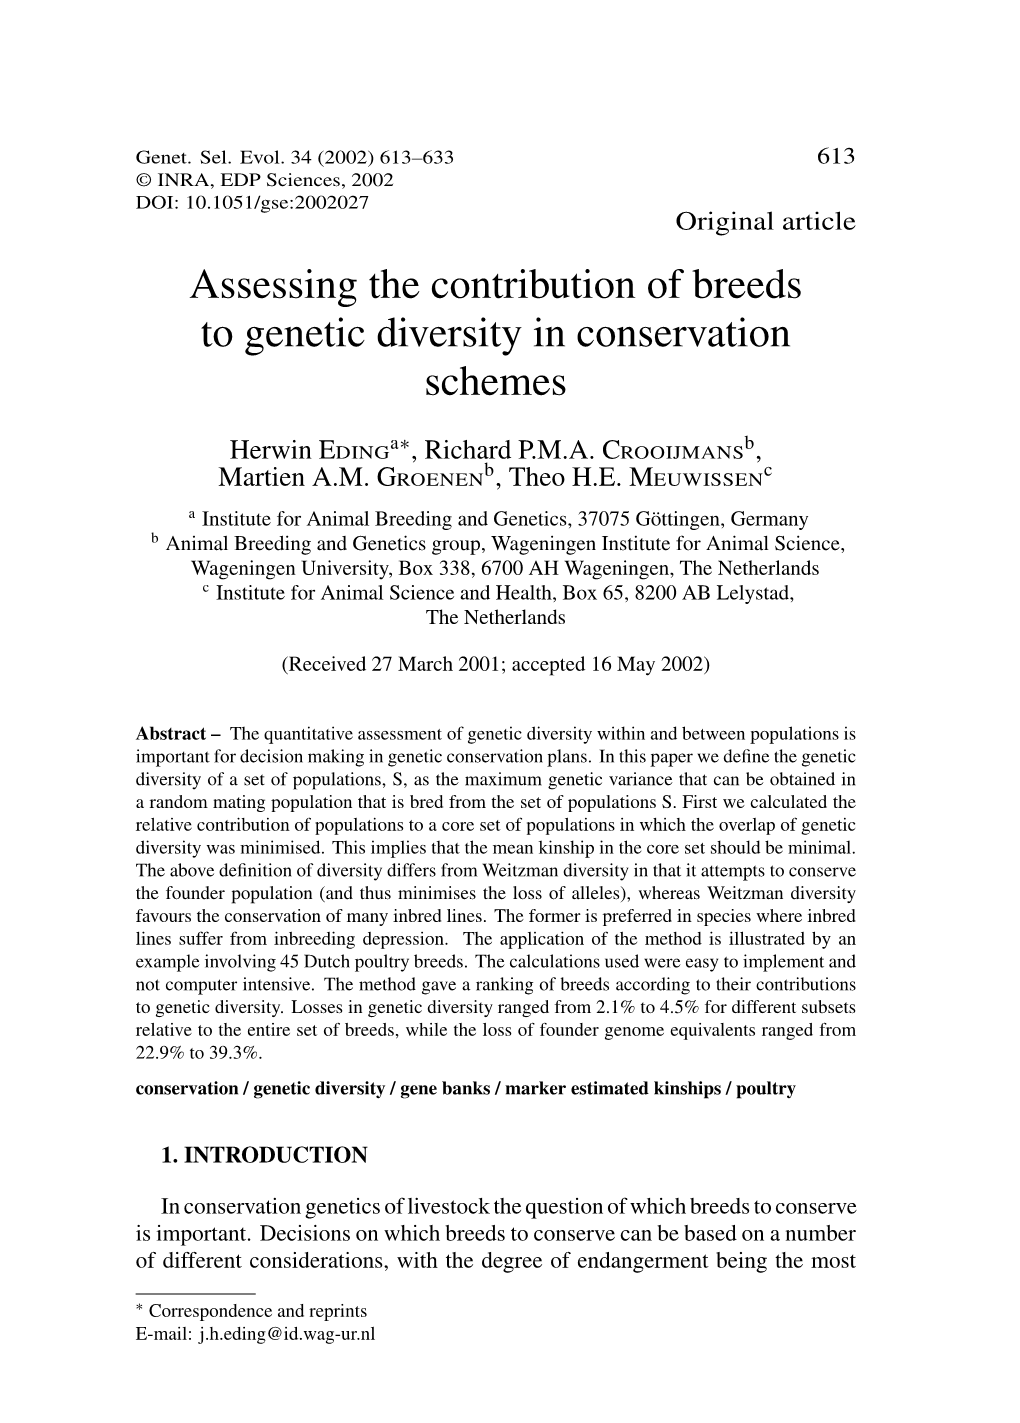 Assessing the Contribution of Breeds to Genetic Diversity in Conservation Schemes